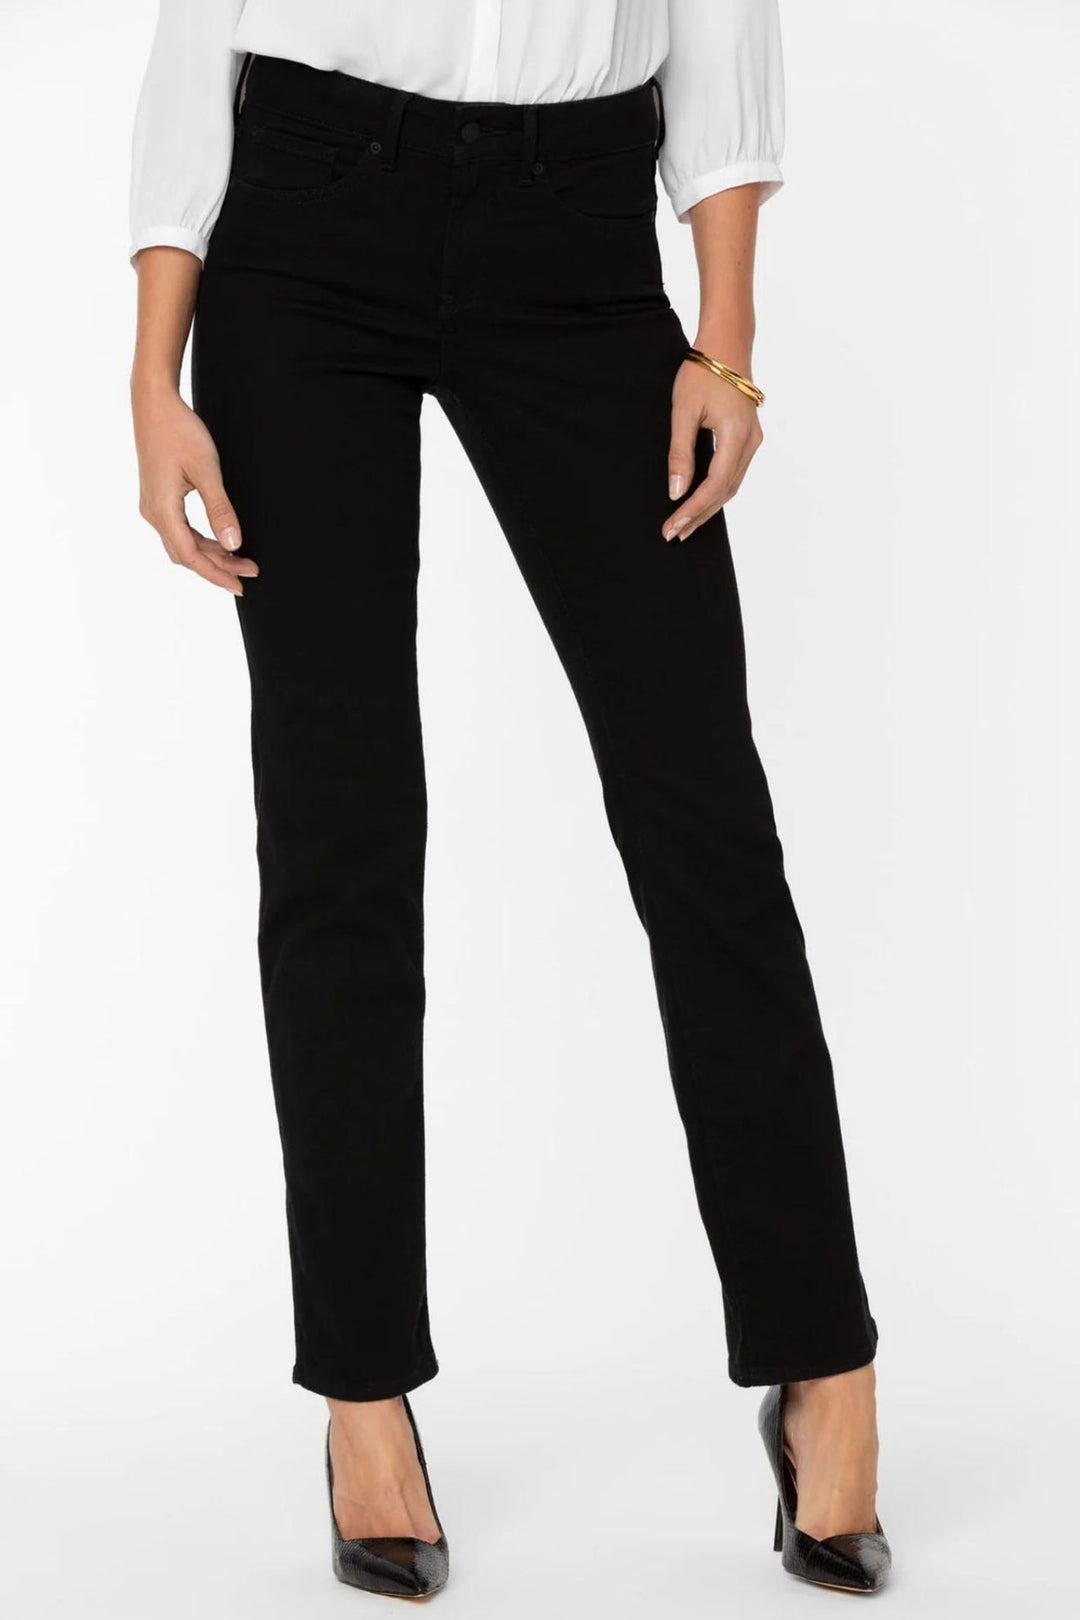 NYDJ Marilyn MNBBMS8517 Black Straight Leg Jeans - Experience Boutique